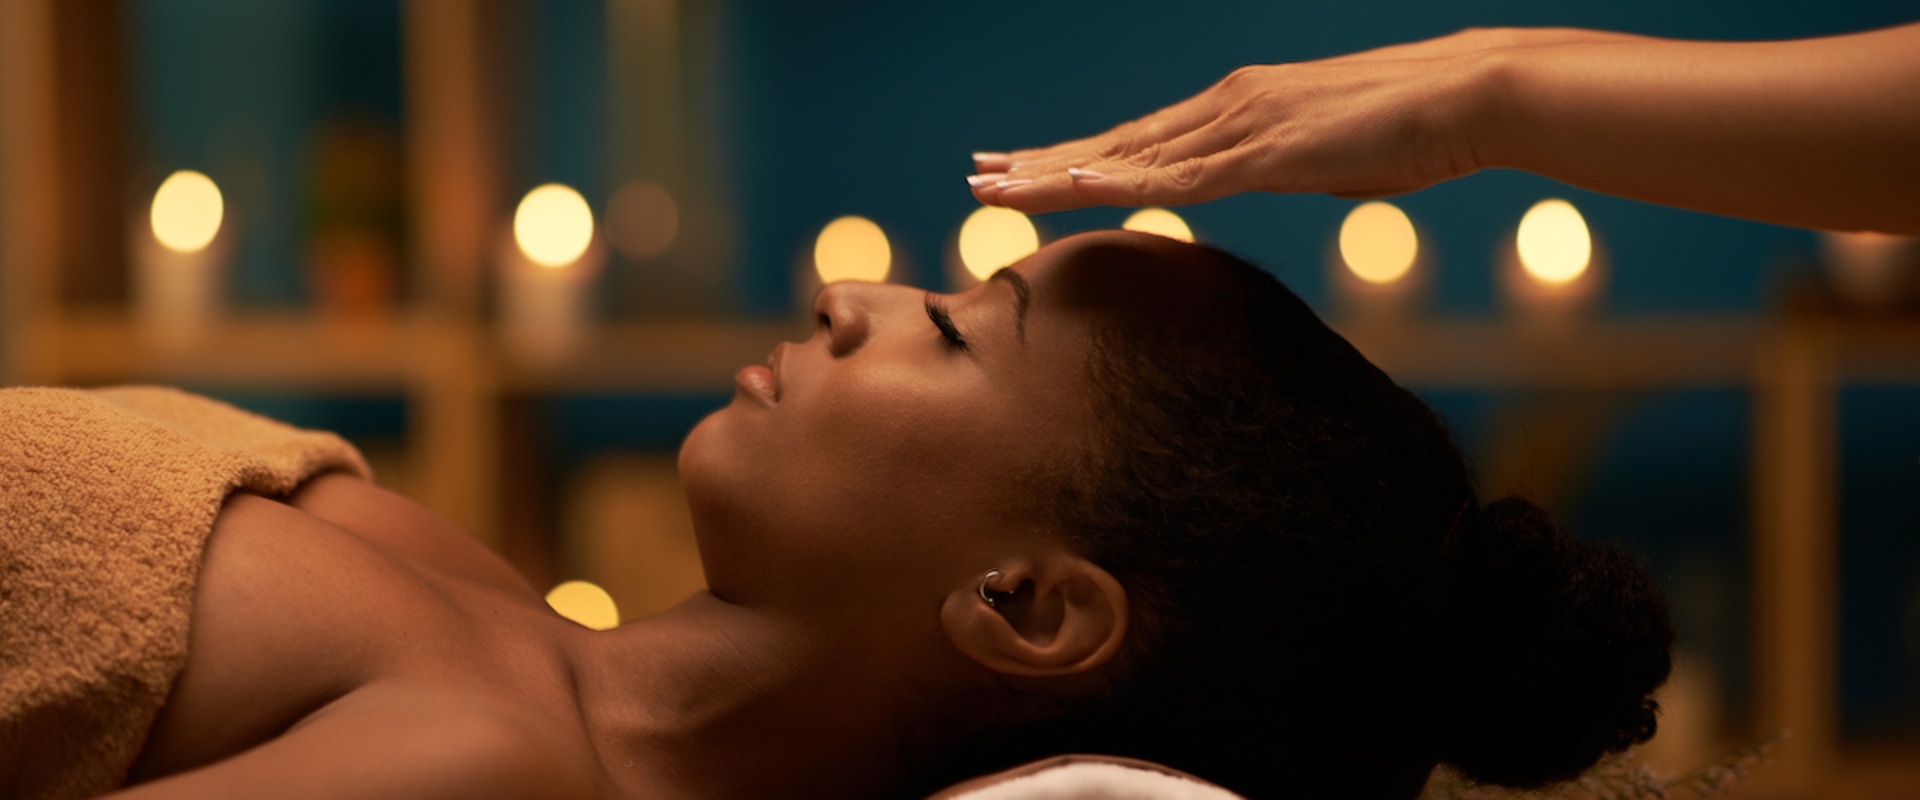 Which is better reiki or reflexology?